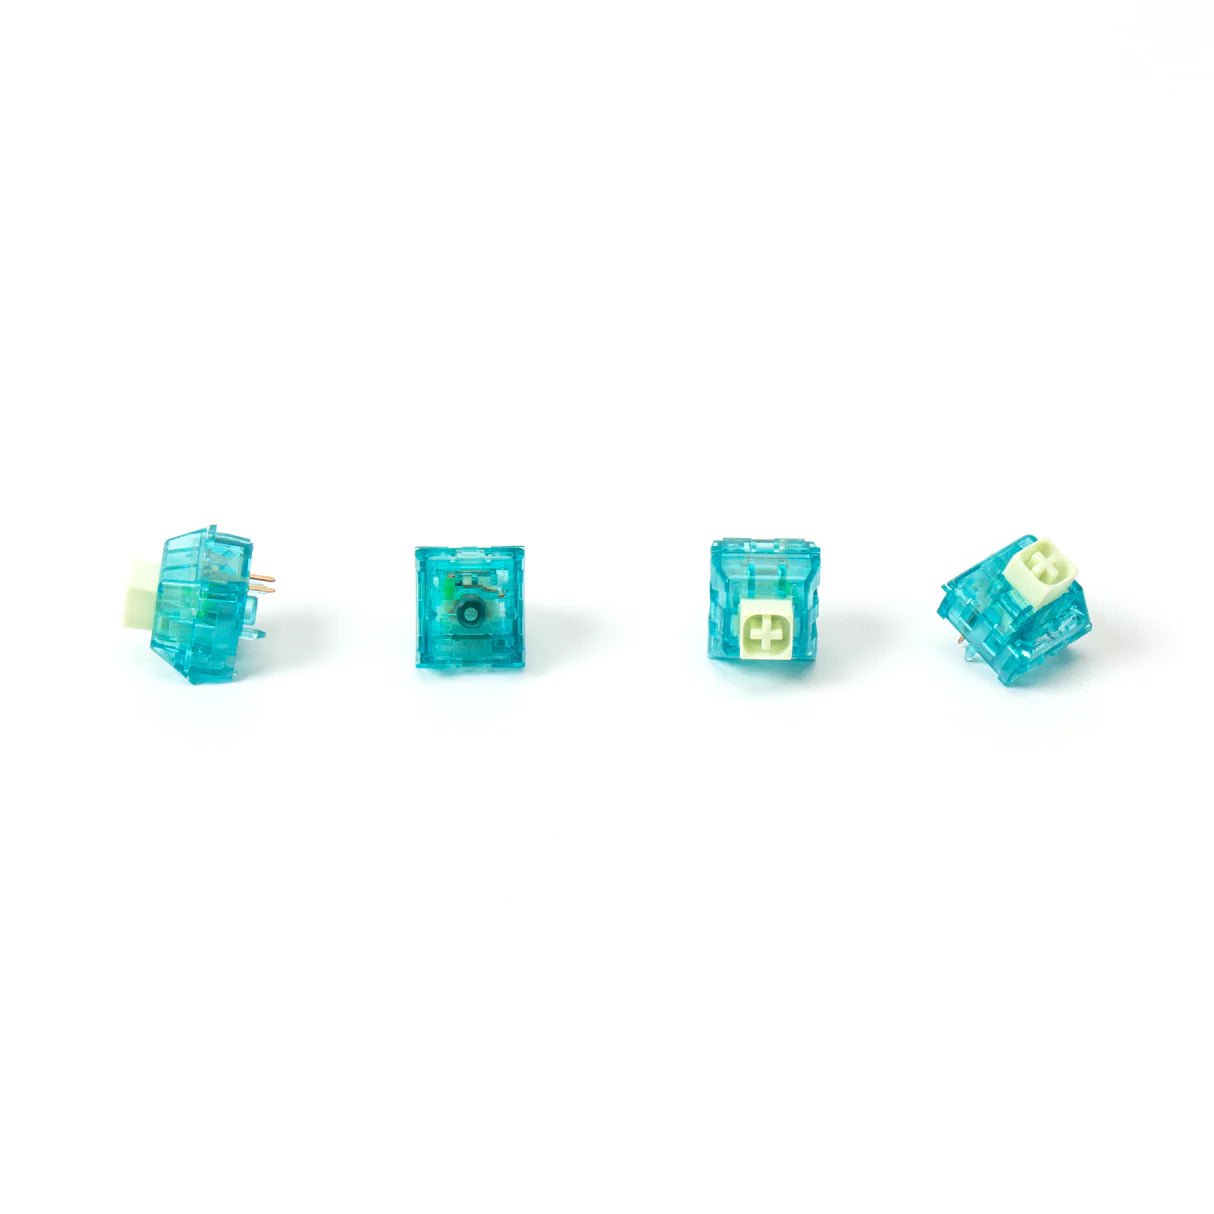 Kailh Box Summer Clicky Switch - Goblintechkeys